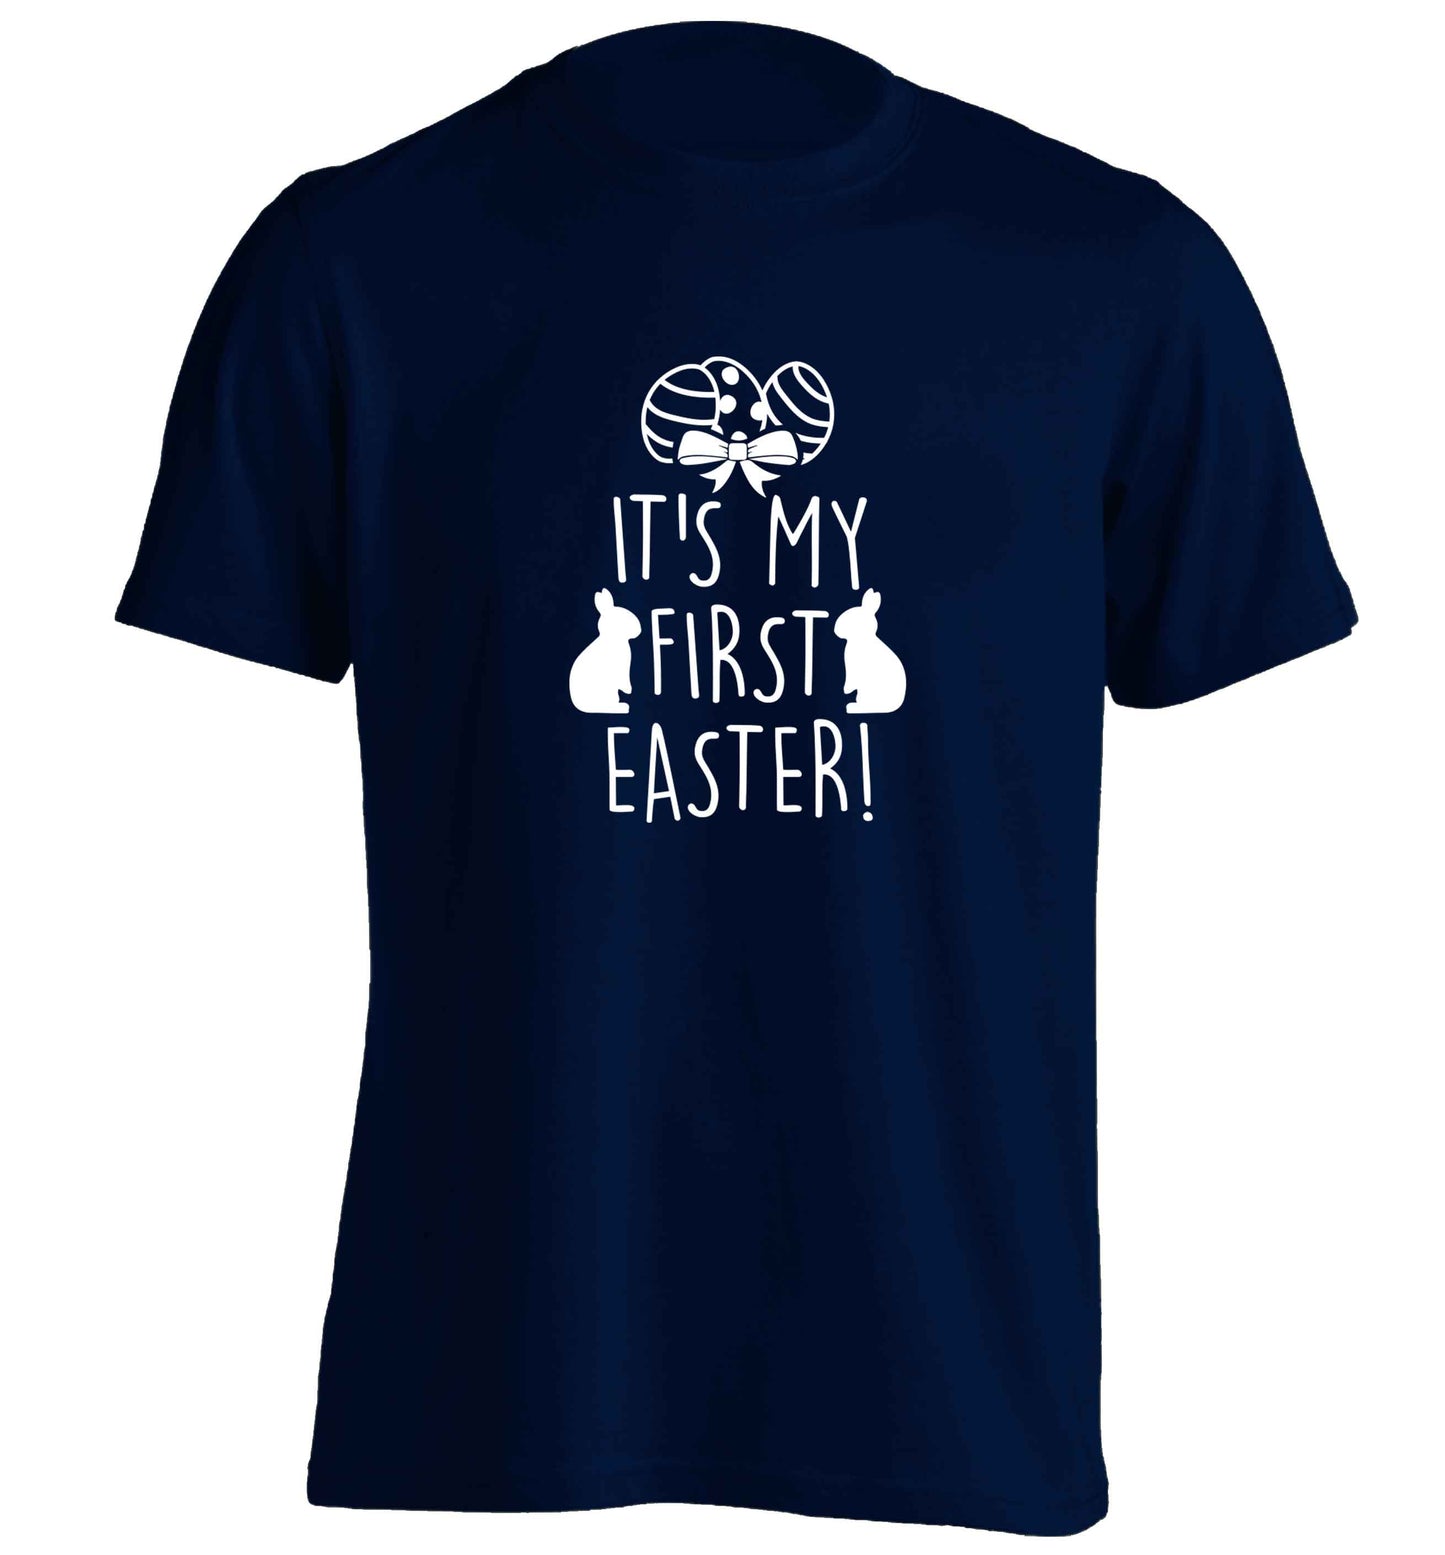 It's my first Easter adults unisex navy Tshirt 2XL